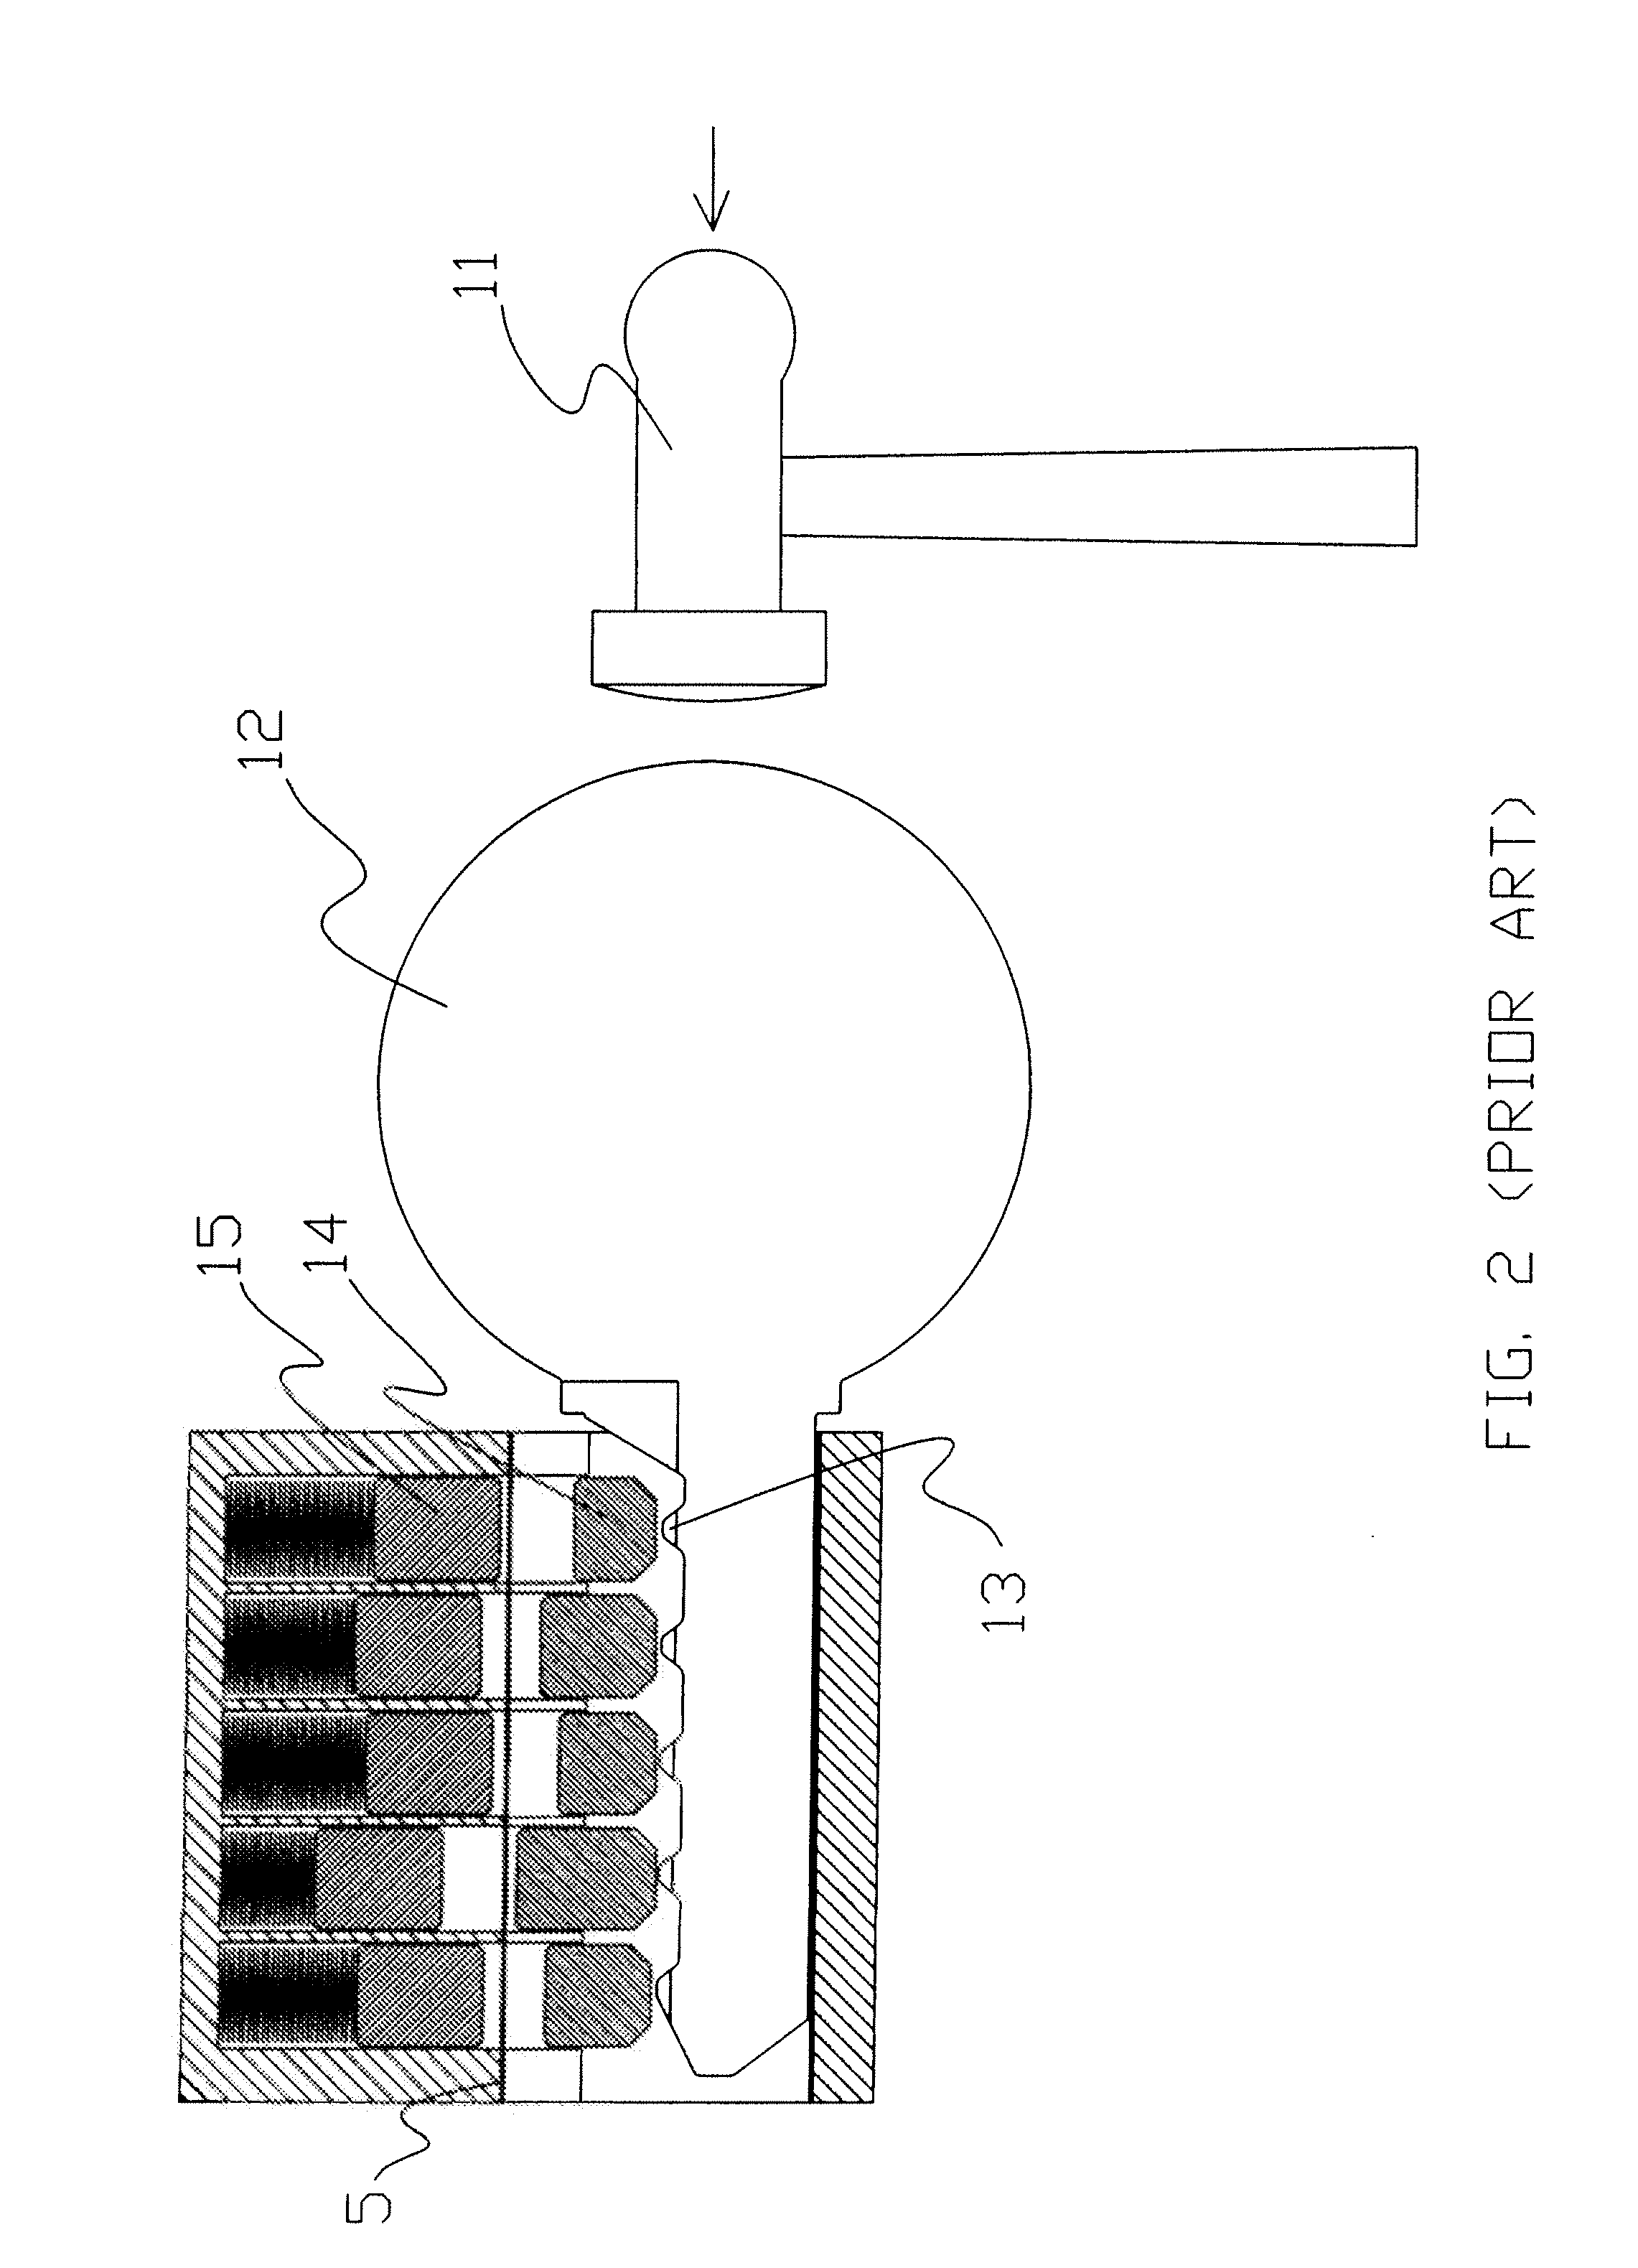 Method and Assembly to Prevent Impact-Driven Lock Manipulation of Cylinder Locks